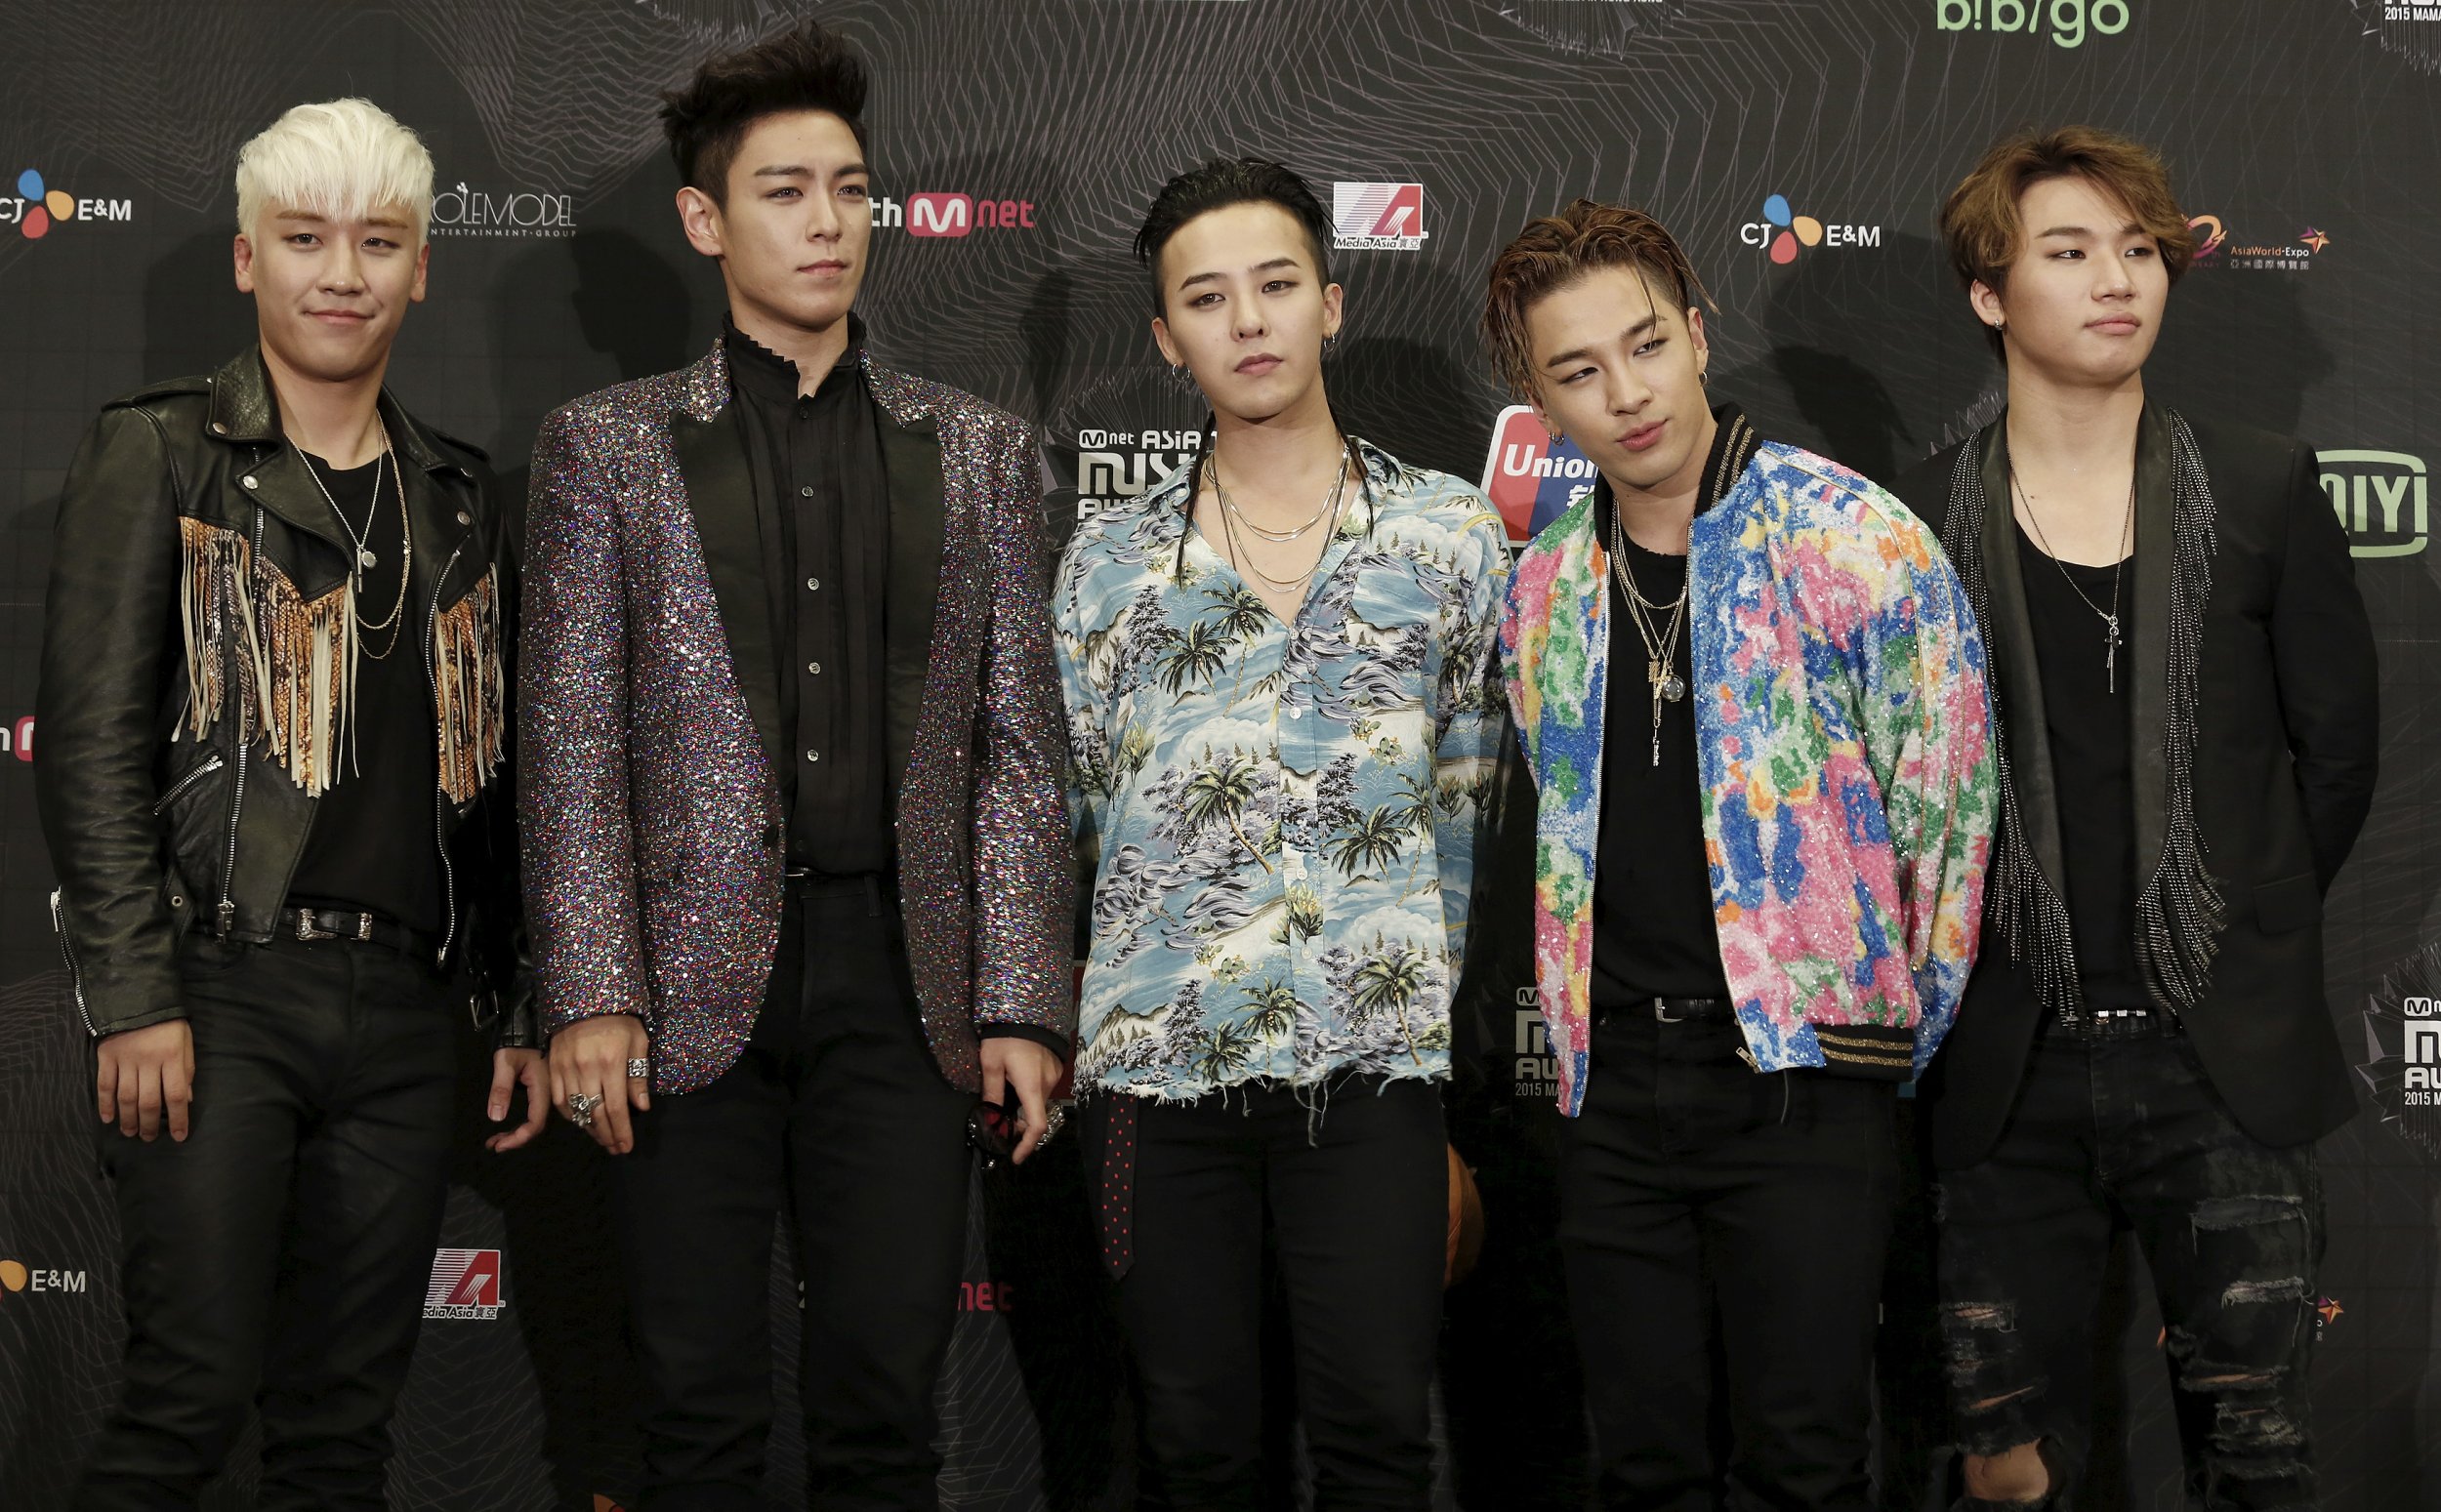 BIGBANG Releases MADE: How To Listen To K-Pop Band's New Album